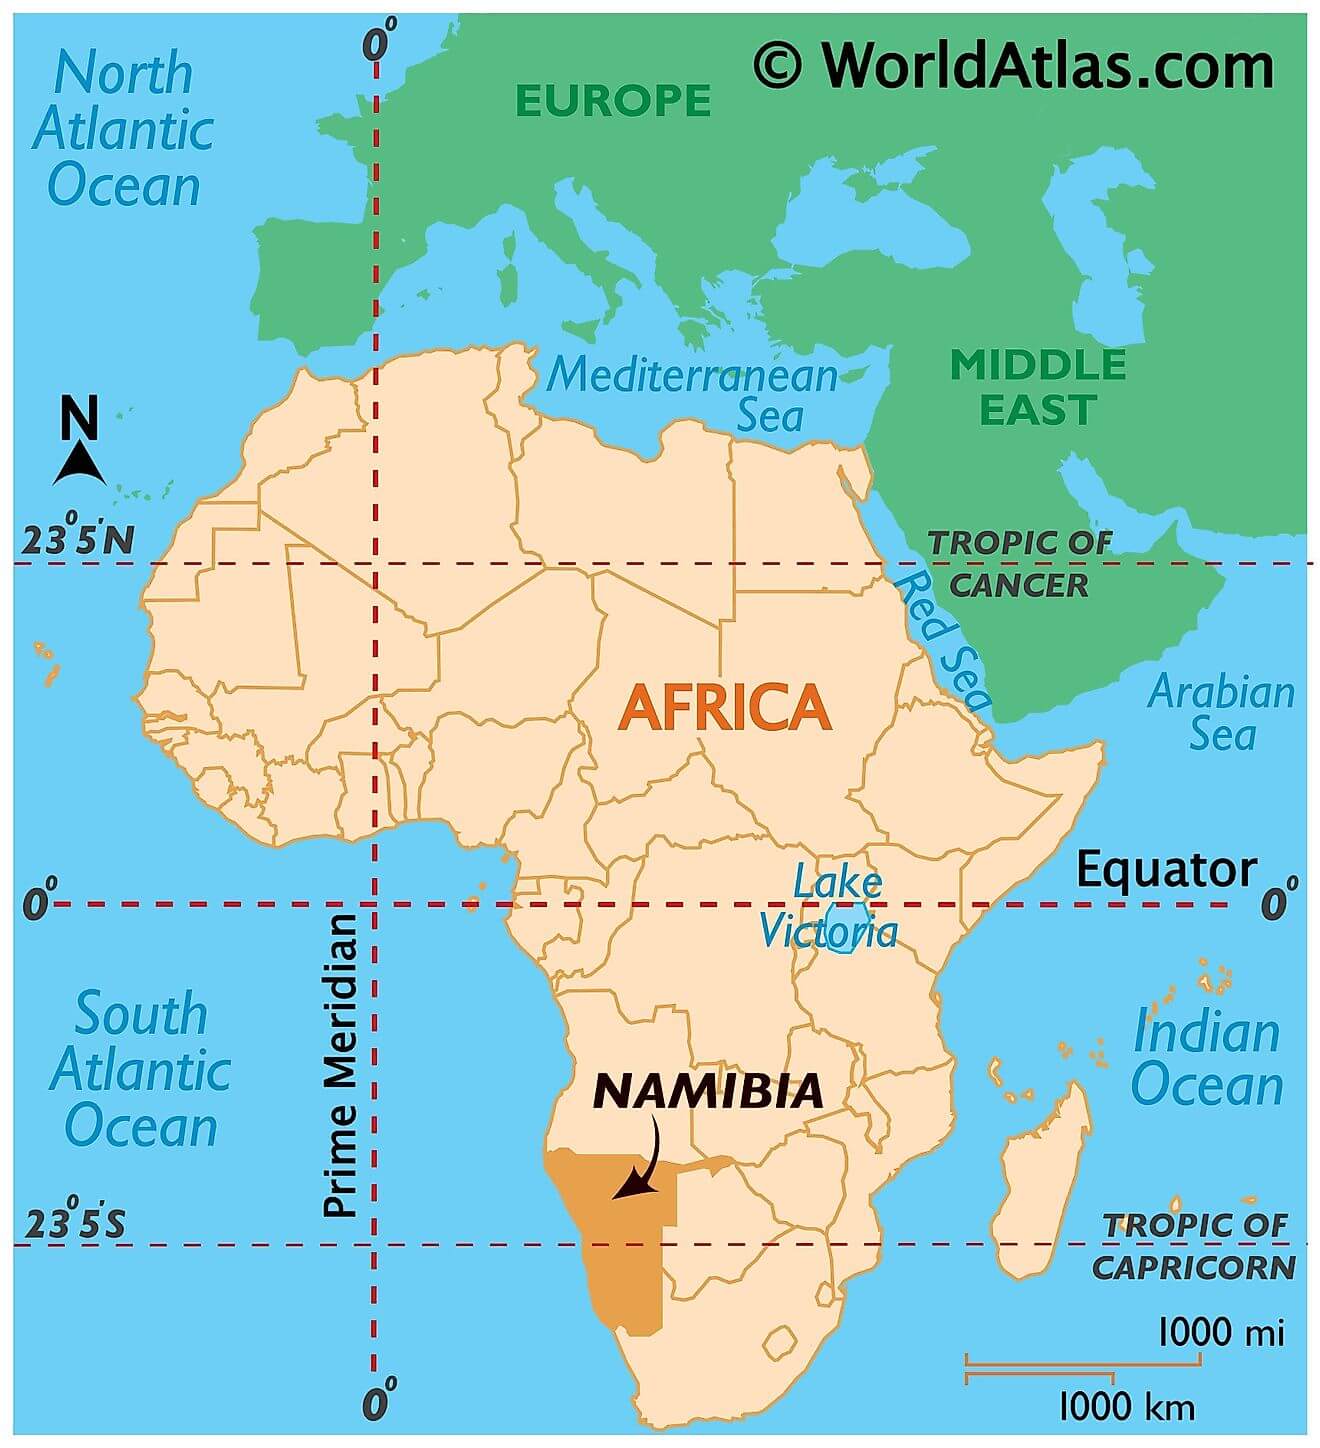 Where is Namibia?